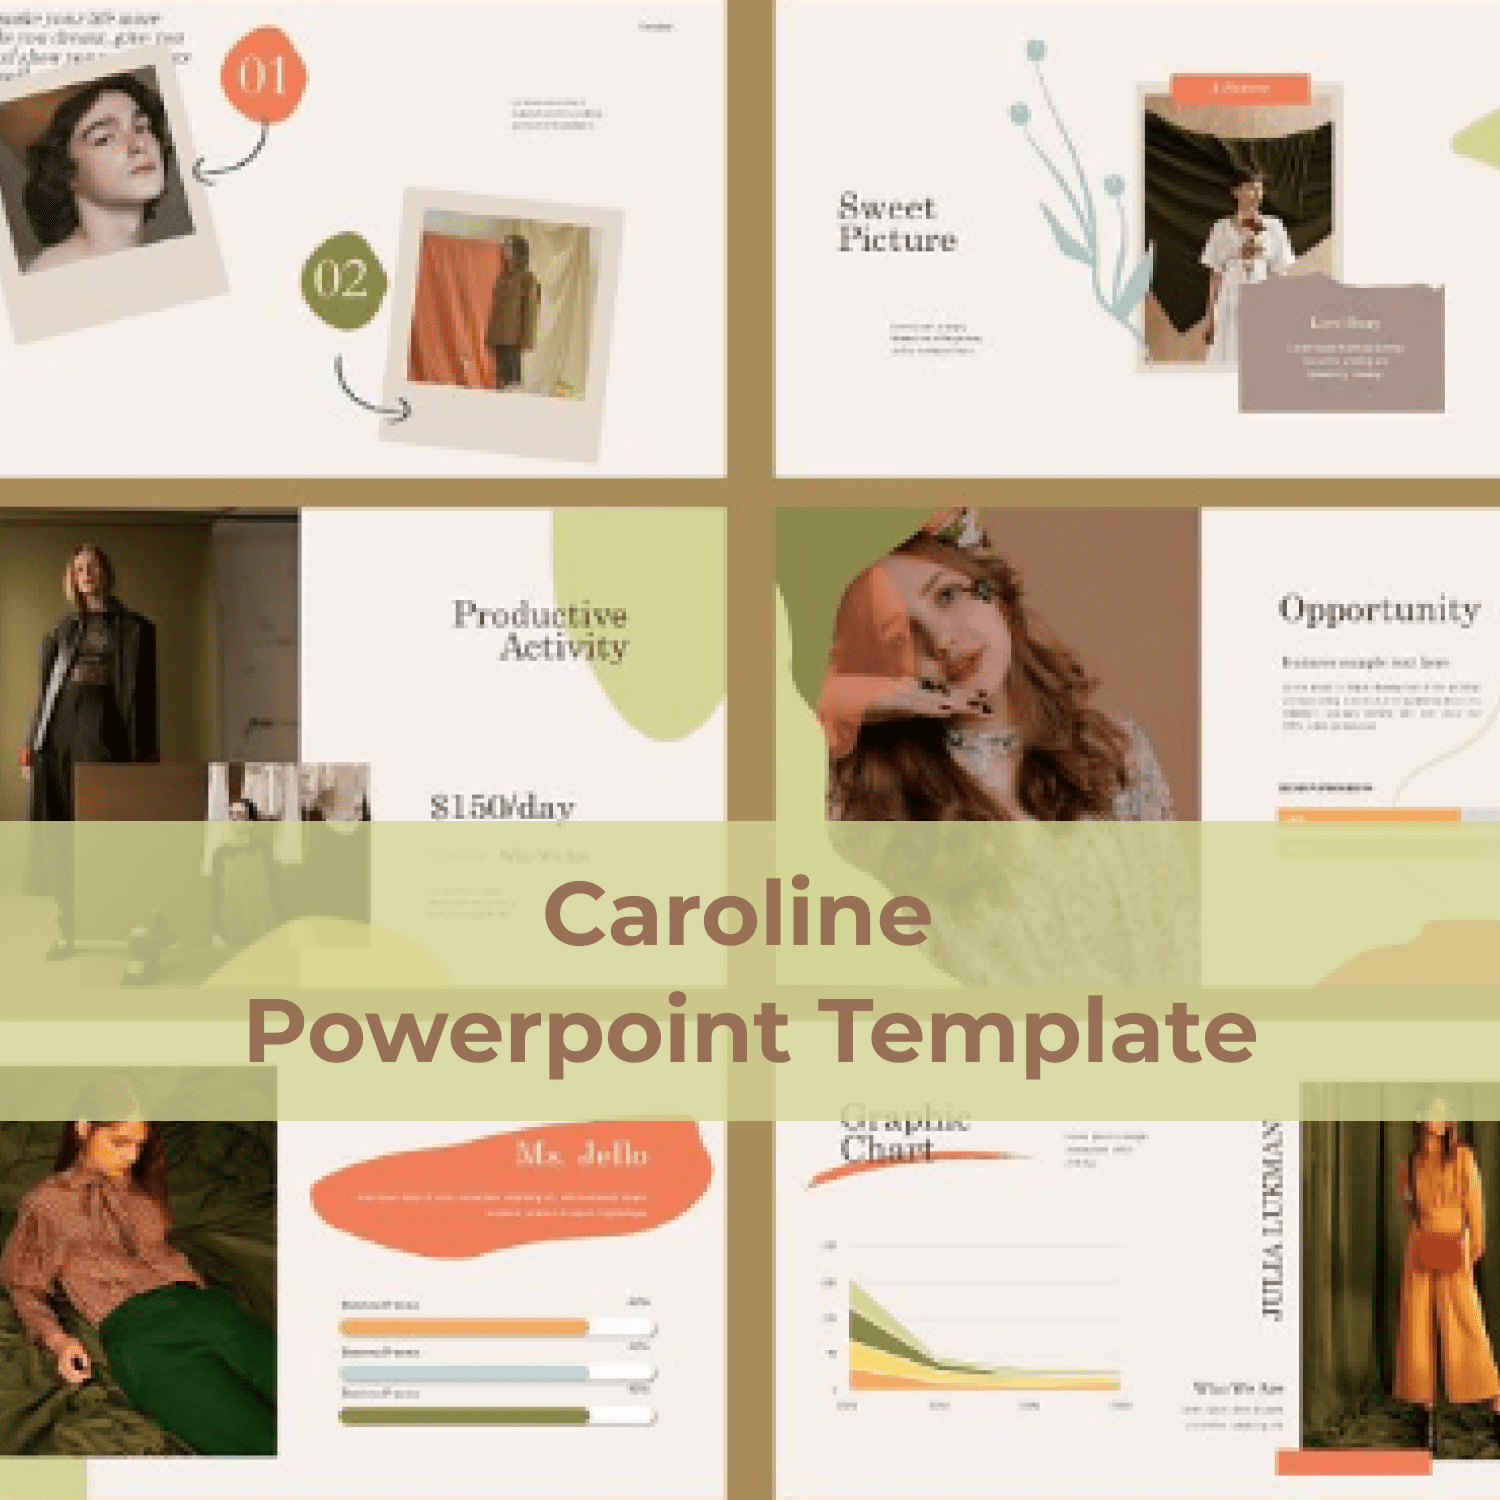 Caroline Powerpoint Template cover image.